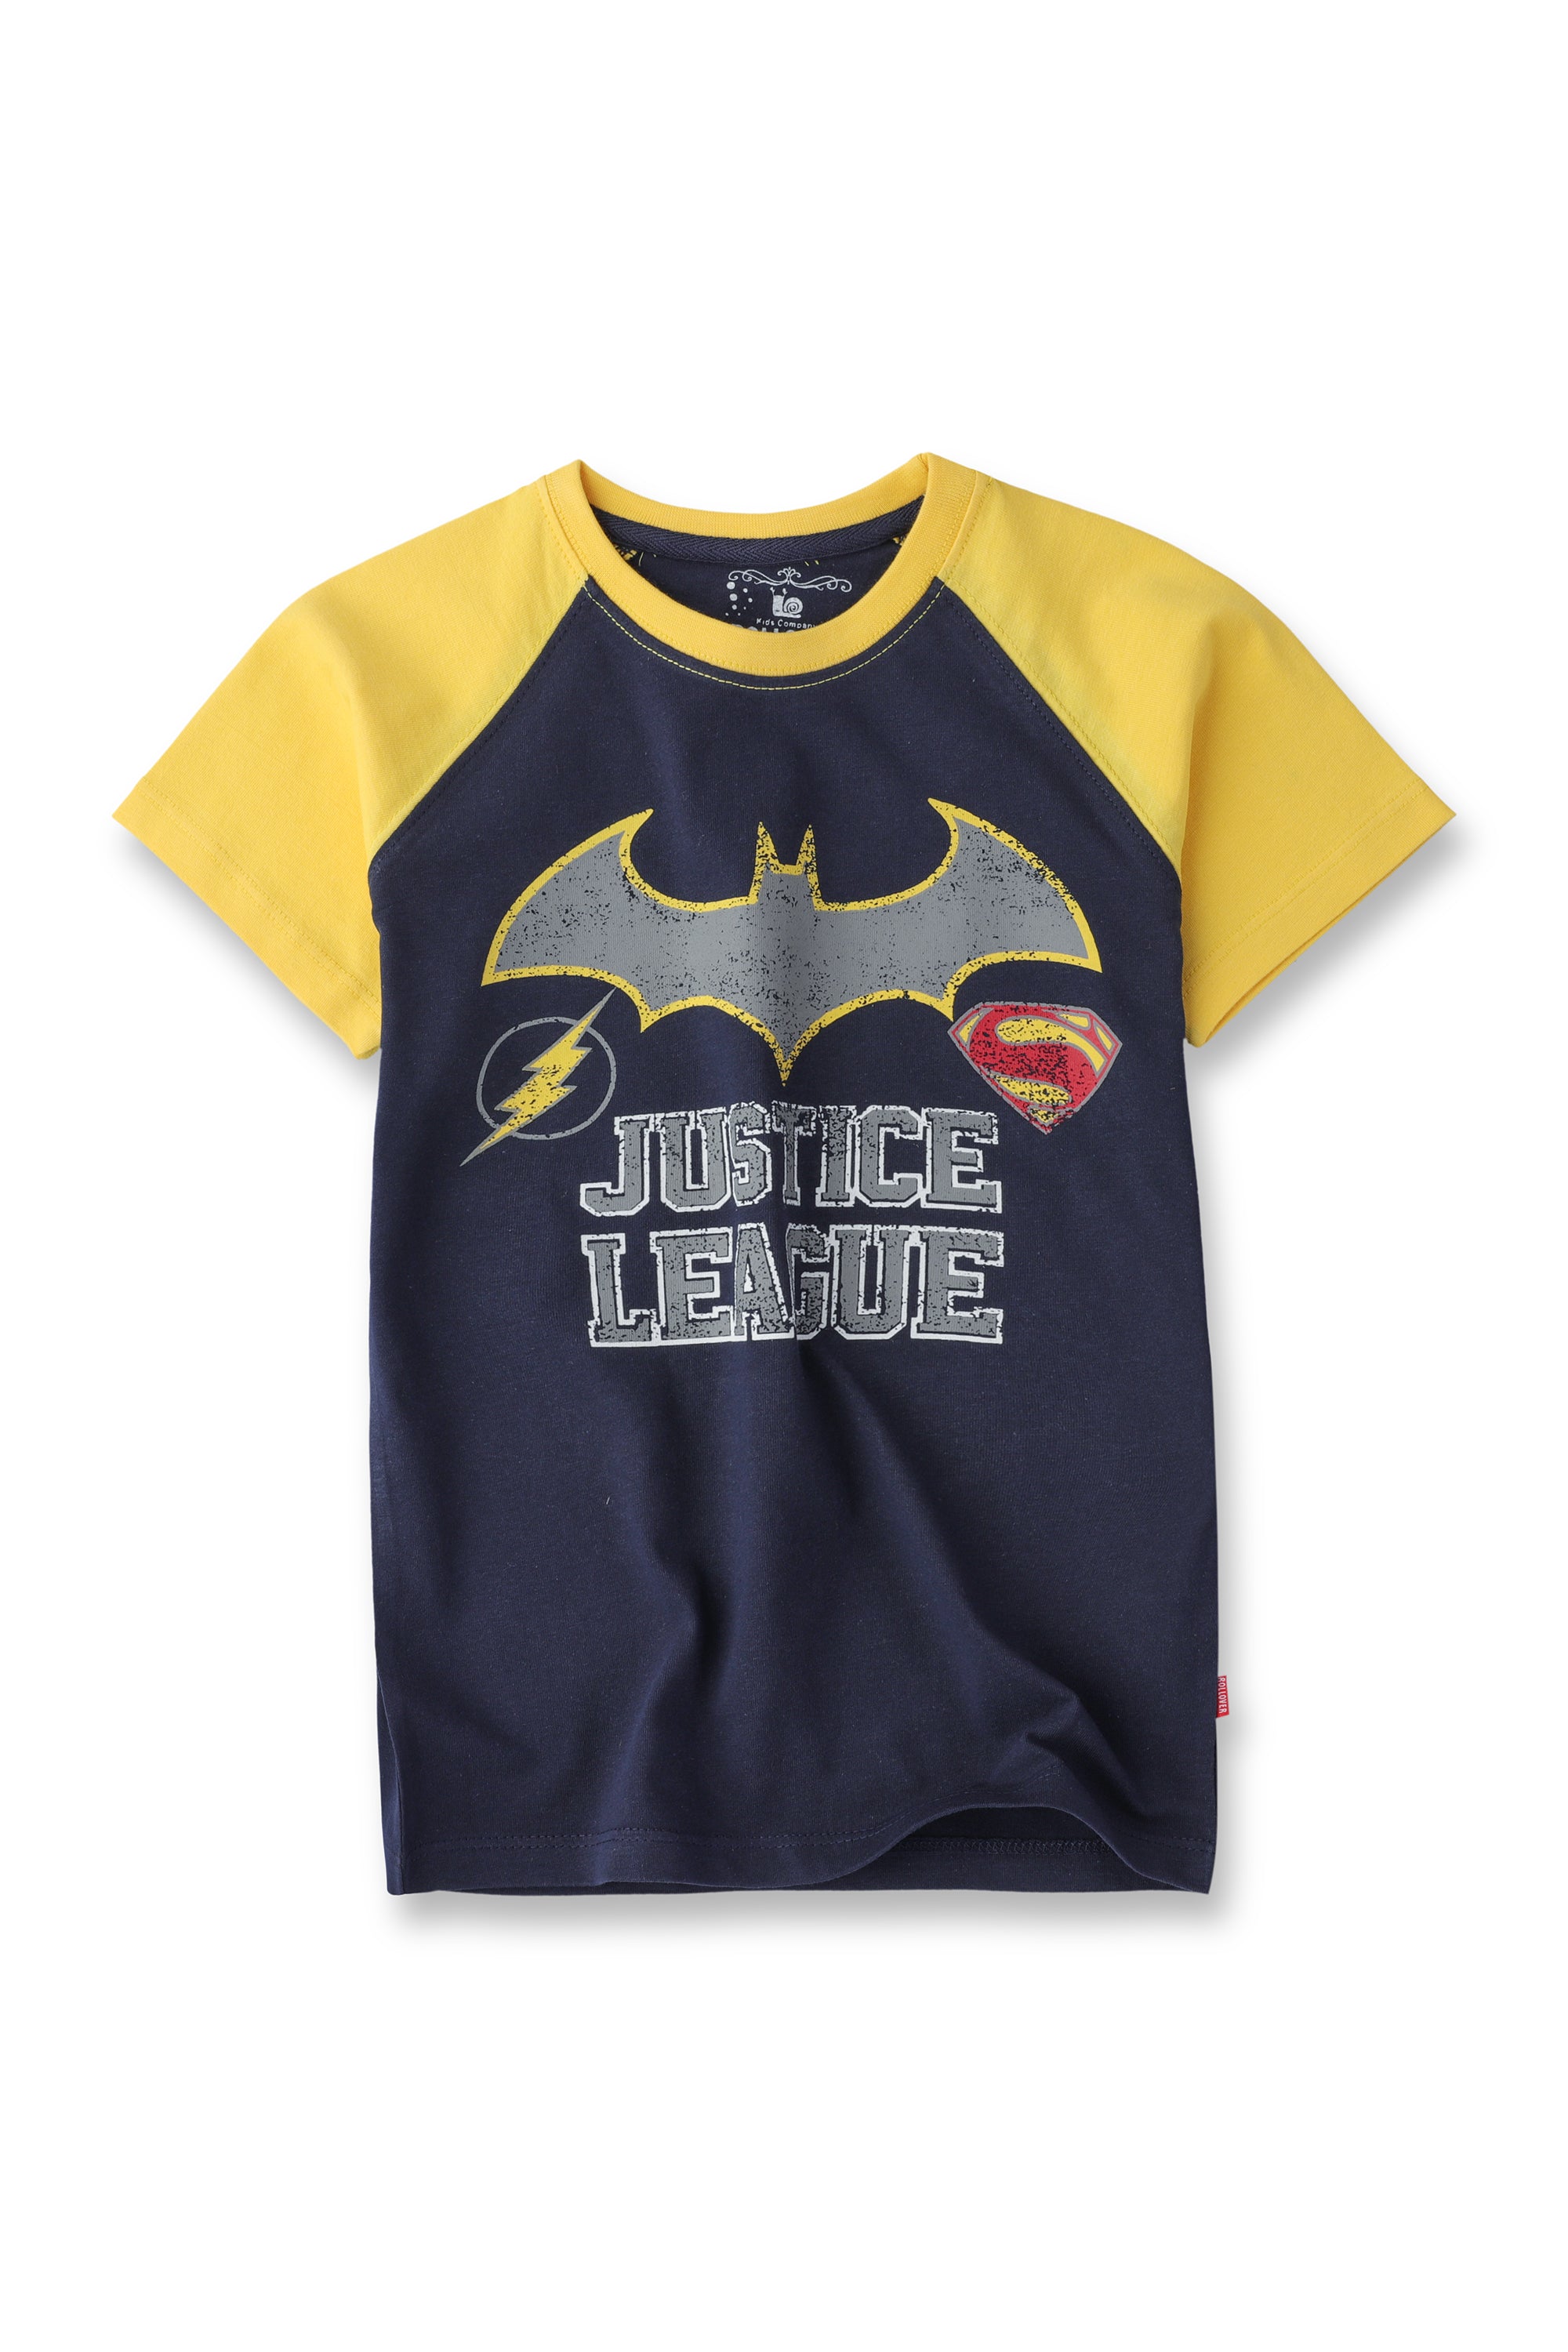 Iconic Justice League T-shirt